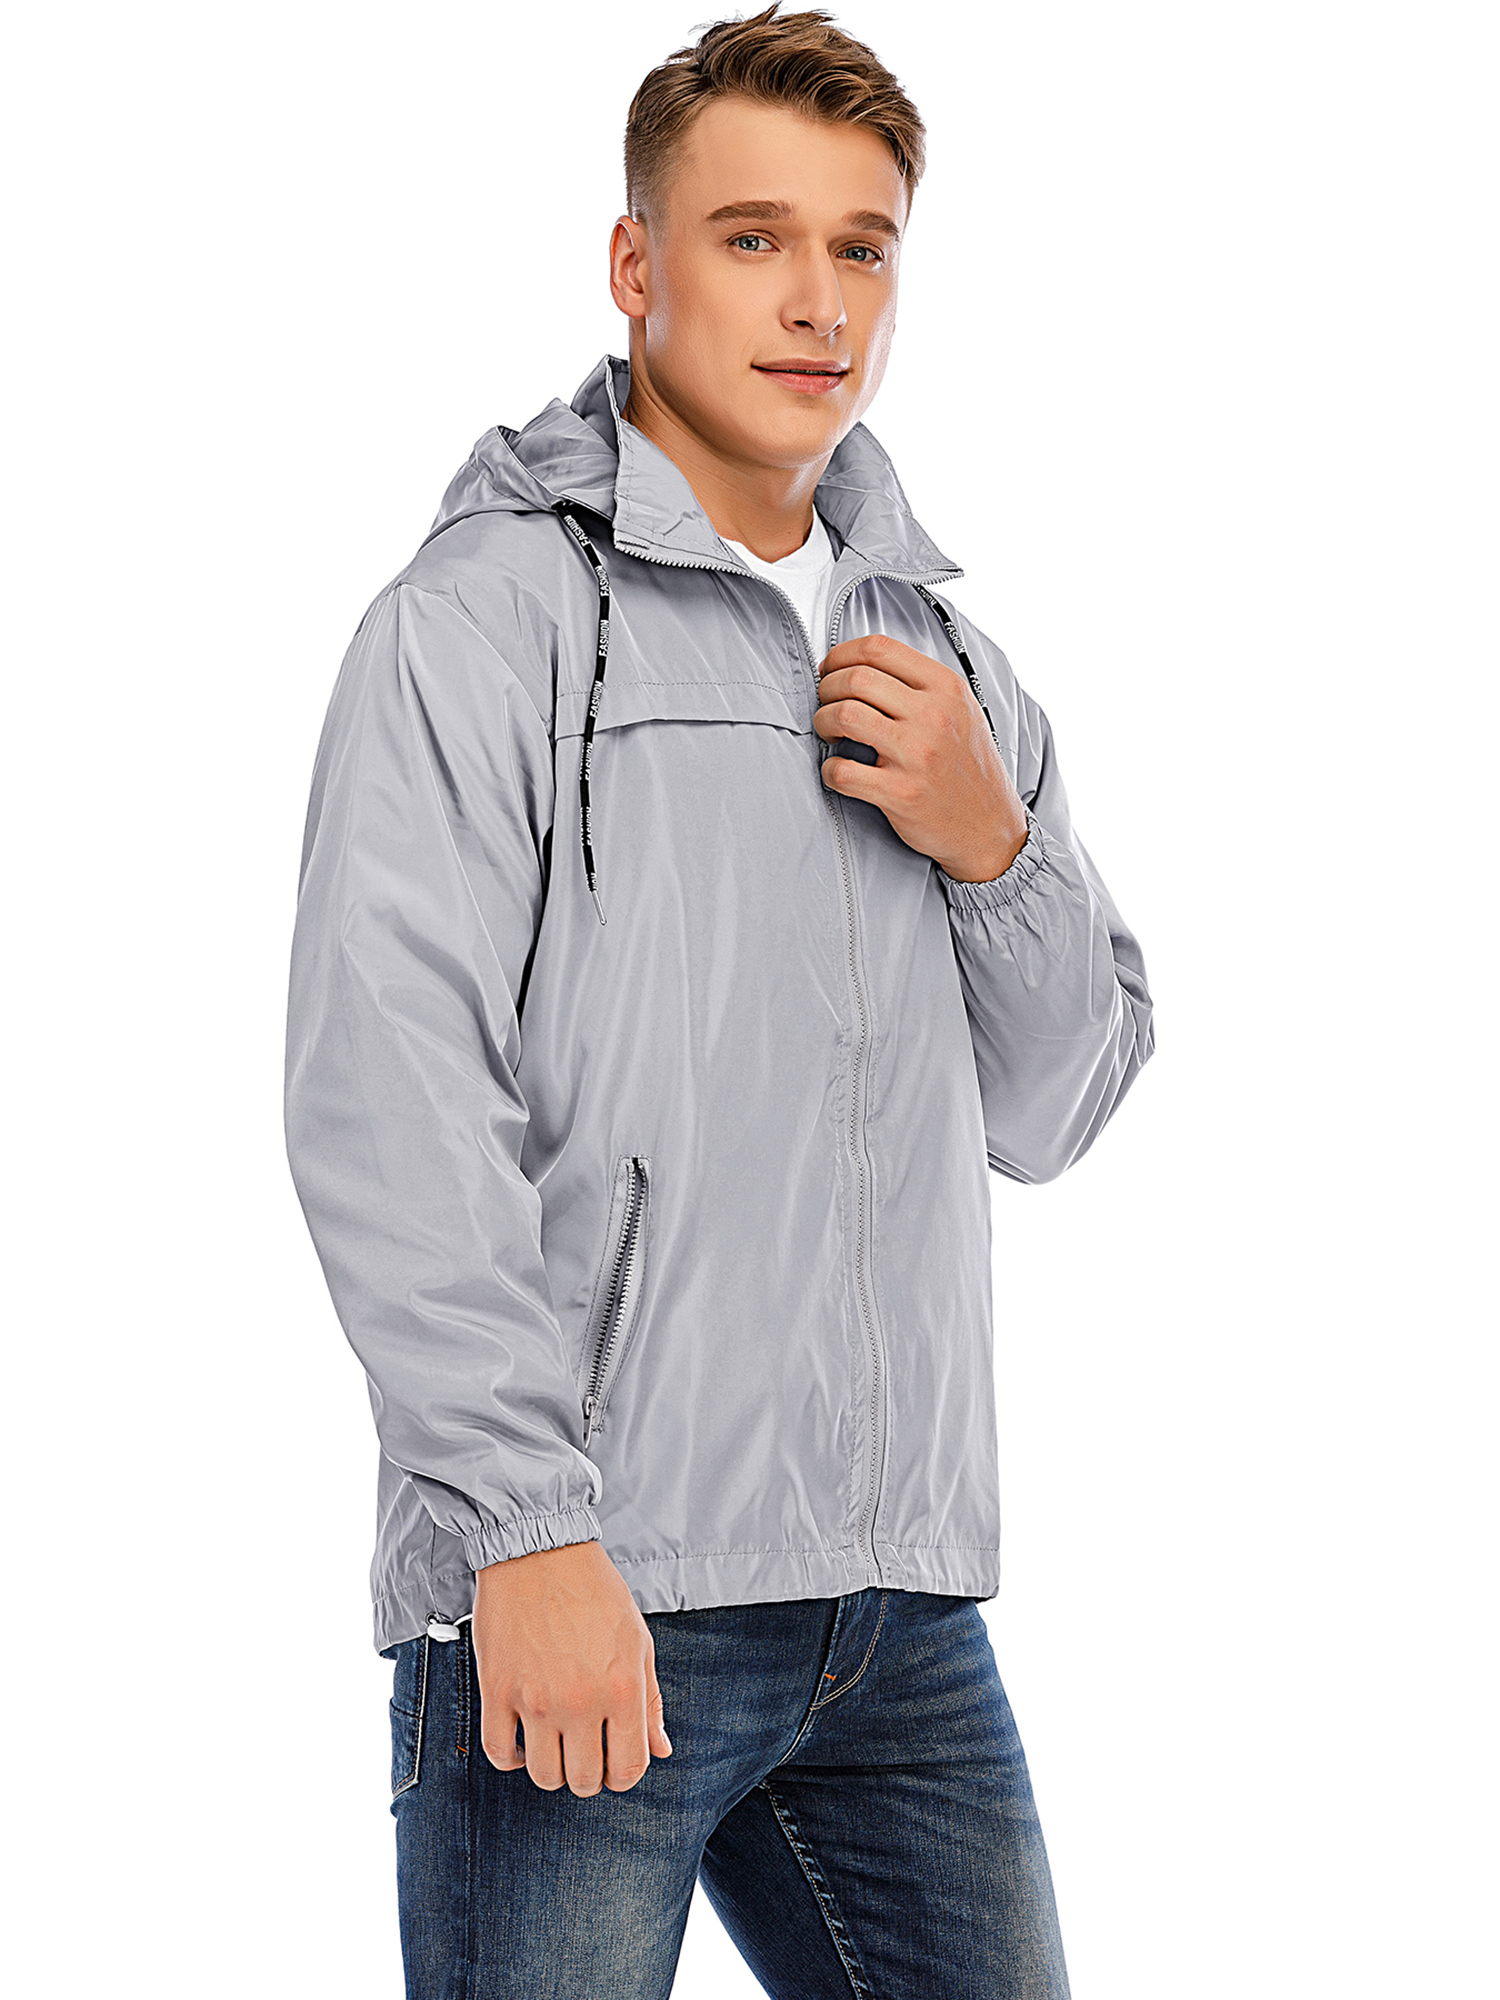 Men Hooded Waterproof Outdoor Jacket Lightweight Rain Jacket Windproof Water Resistant Jacket for Hiking Casual Work, Big & Tall up to Size 3XL - image 5 of 8